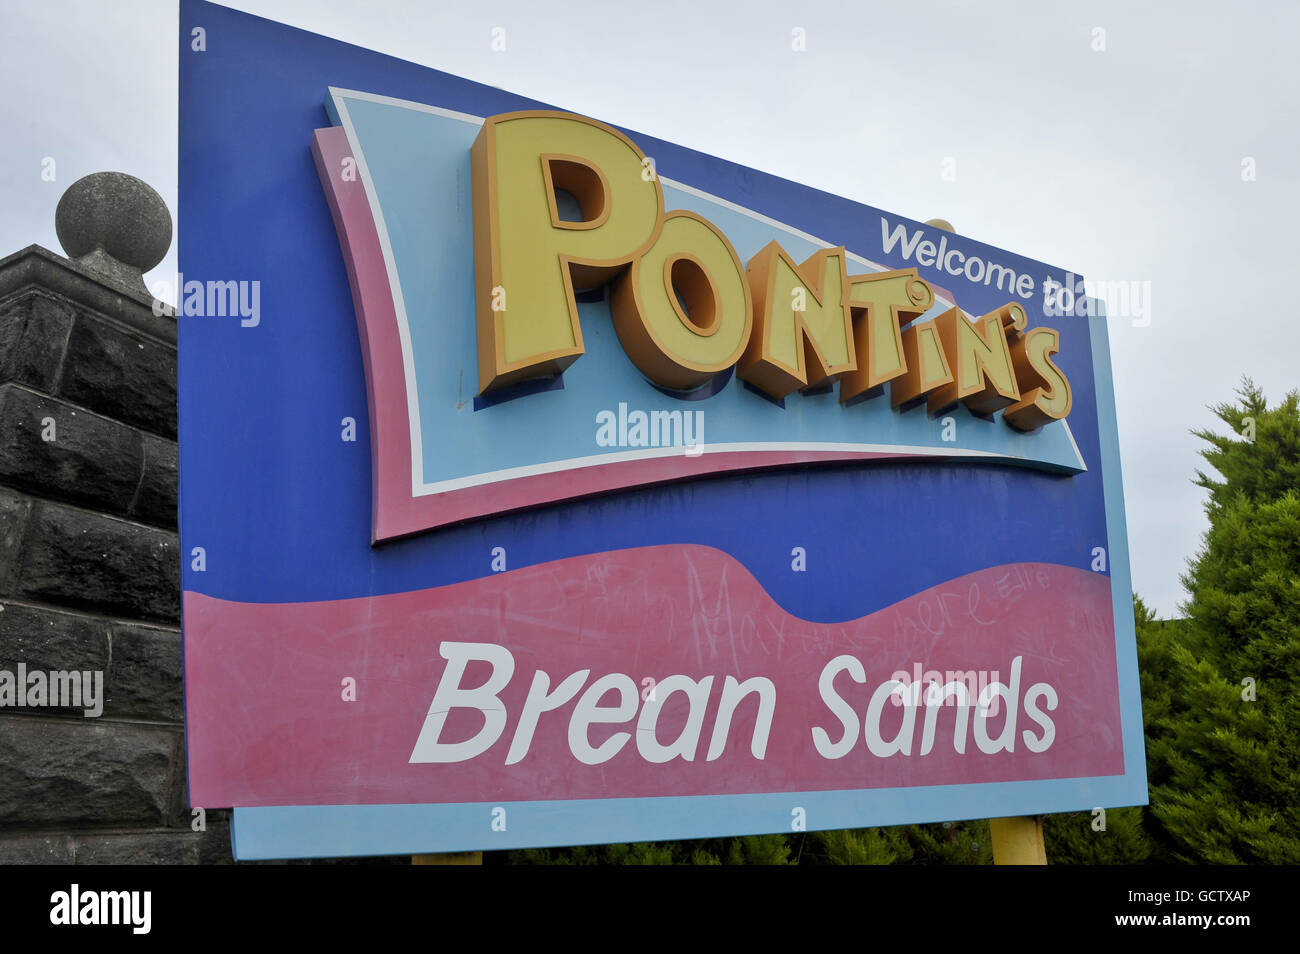 A general view of Pontin's signage at Brean, Somerset. PRESS ASSOCIATION Photo. Picture date: Saturday November 13, 2010. See PA story CITY Pontins. Photo credit should read: Ben Birchall/PA Wire Stock Photo